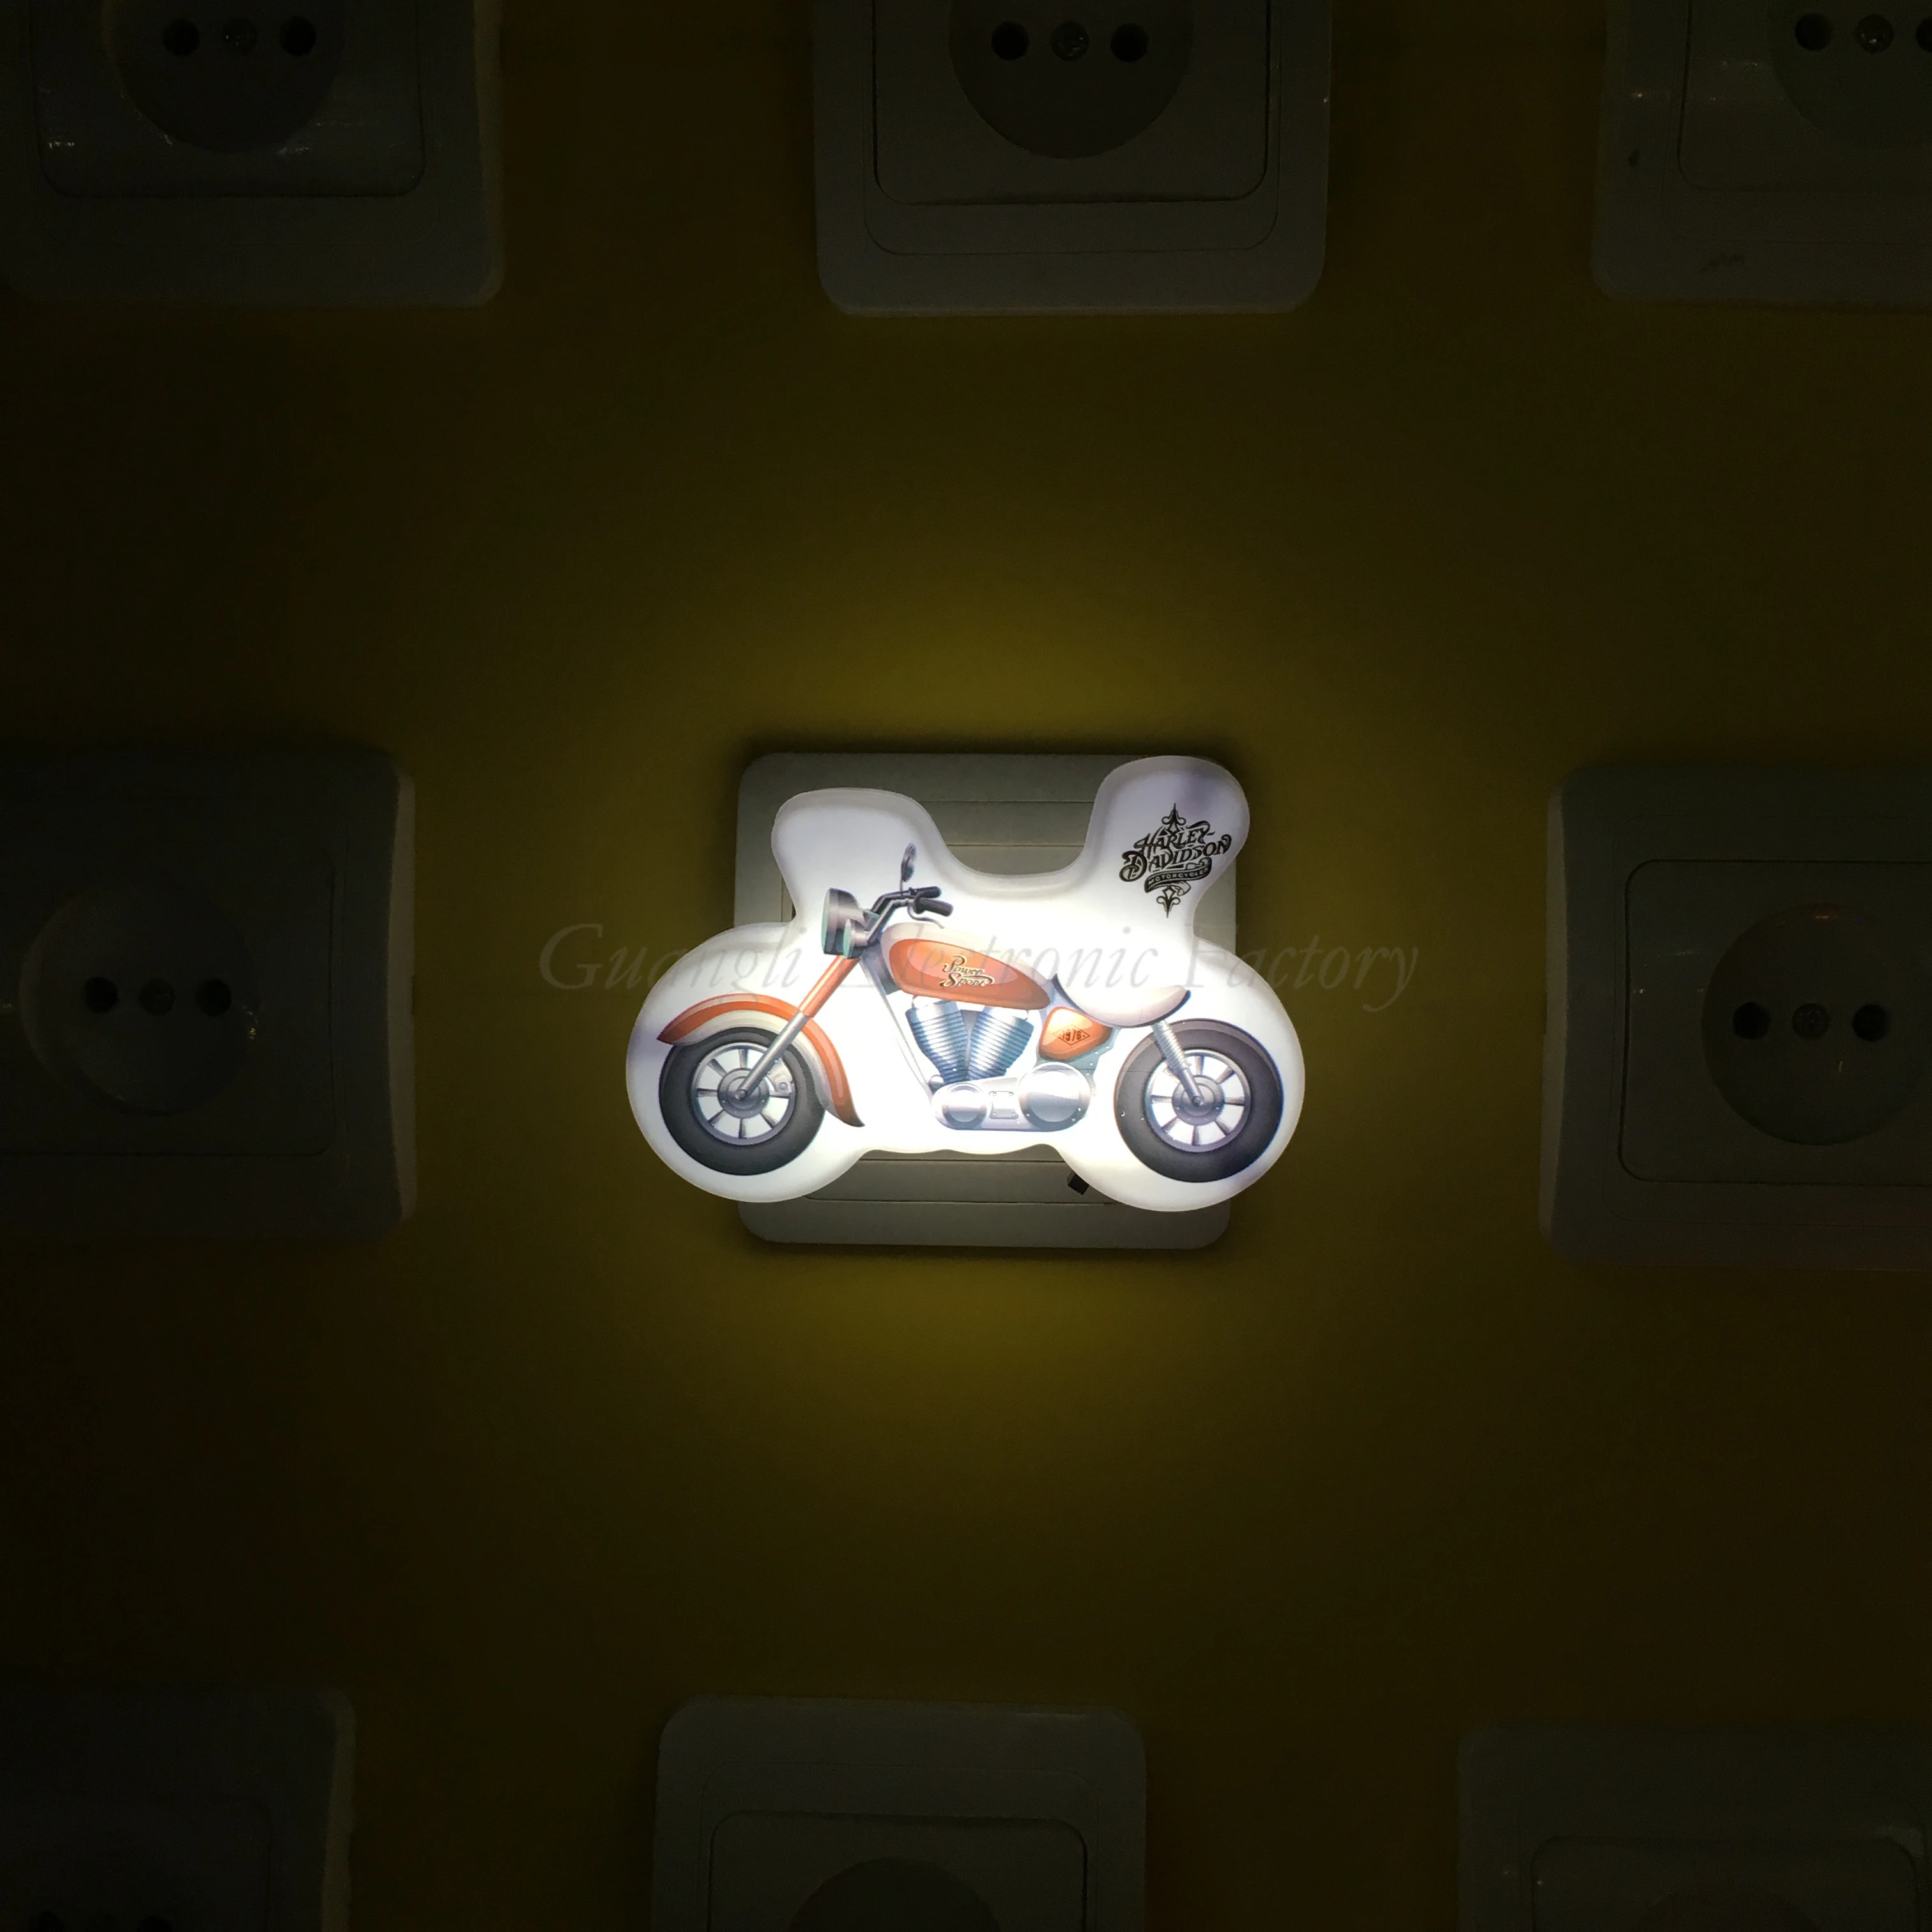 4SMD mini switch plug in motorbike Motorcycle  room usege night light For Baby Bedroom cute gift W012